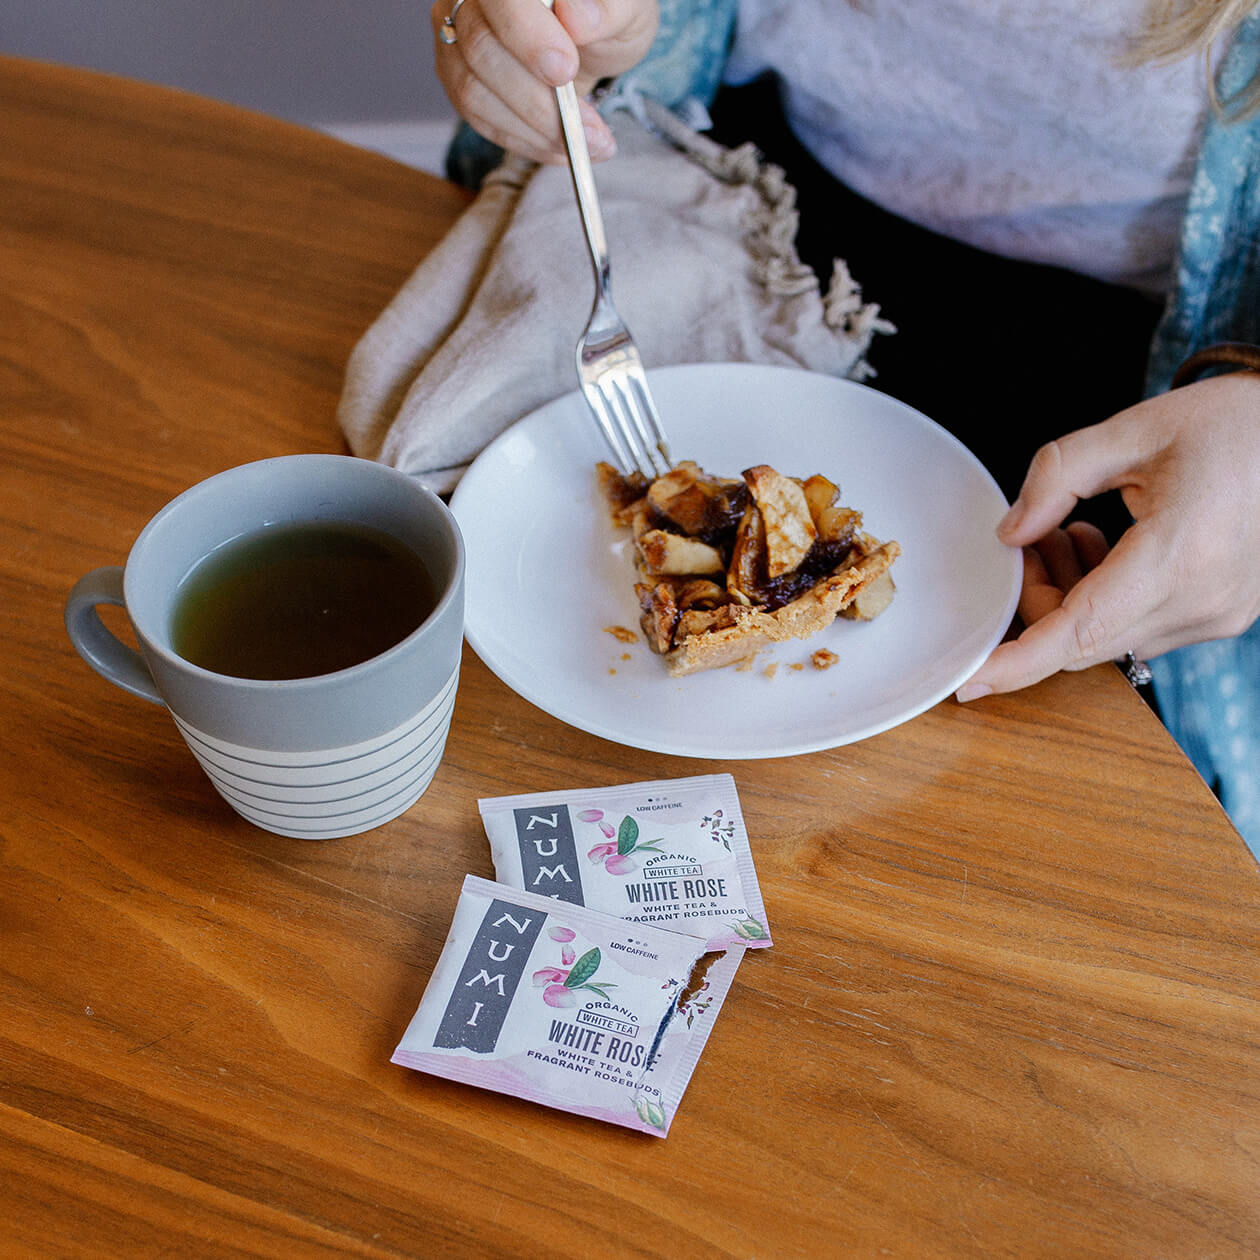 A person enjoying a cup of Numi White Rose Tea with dessert